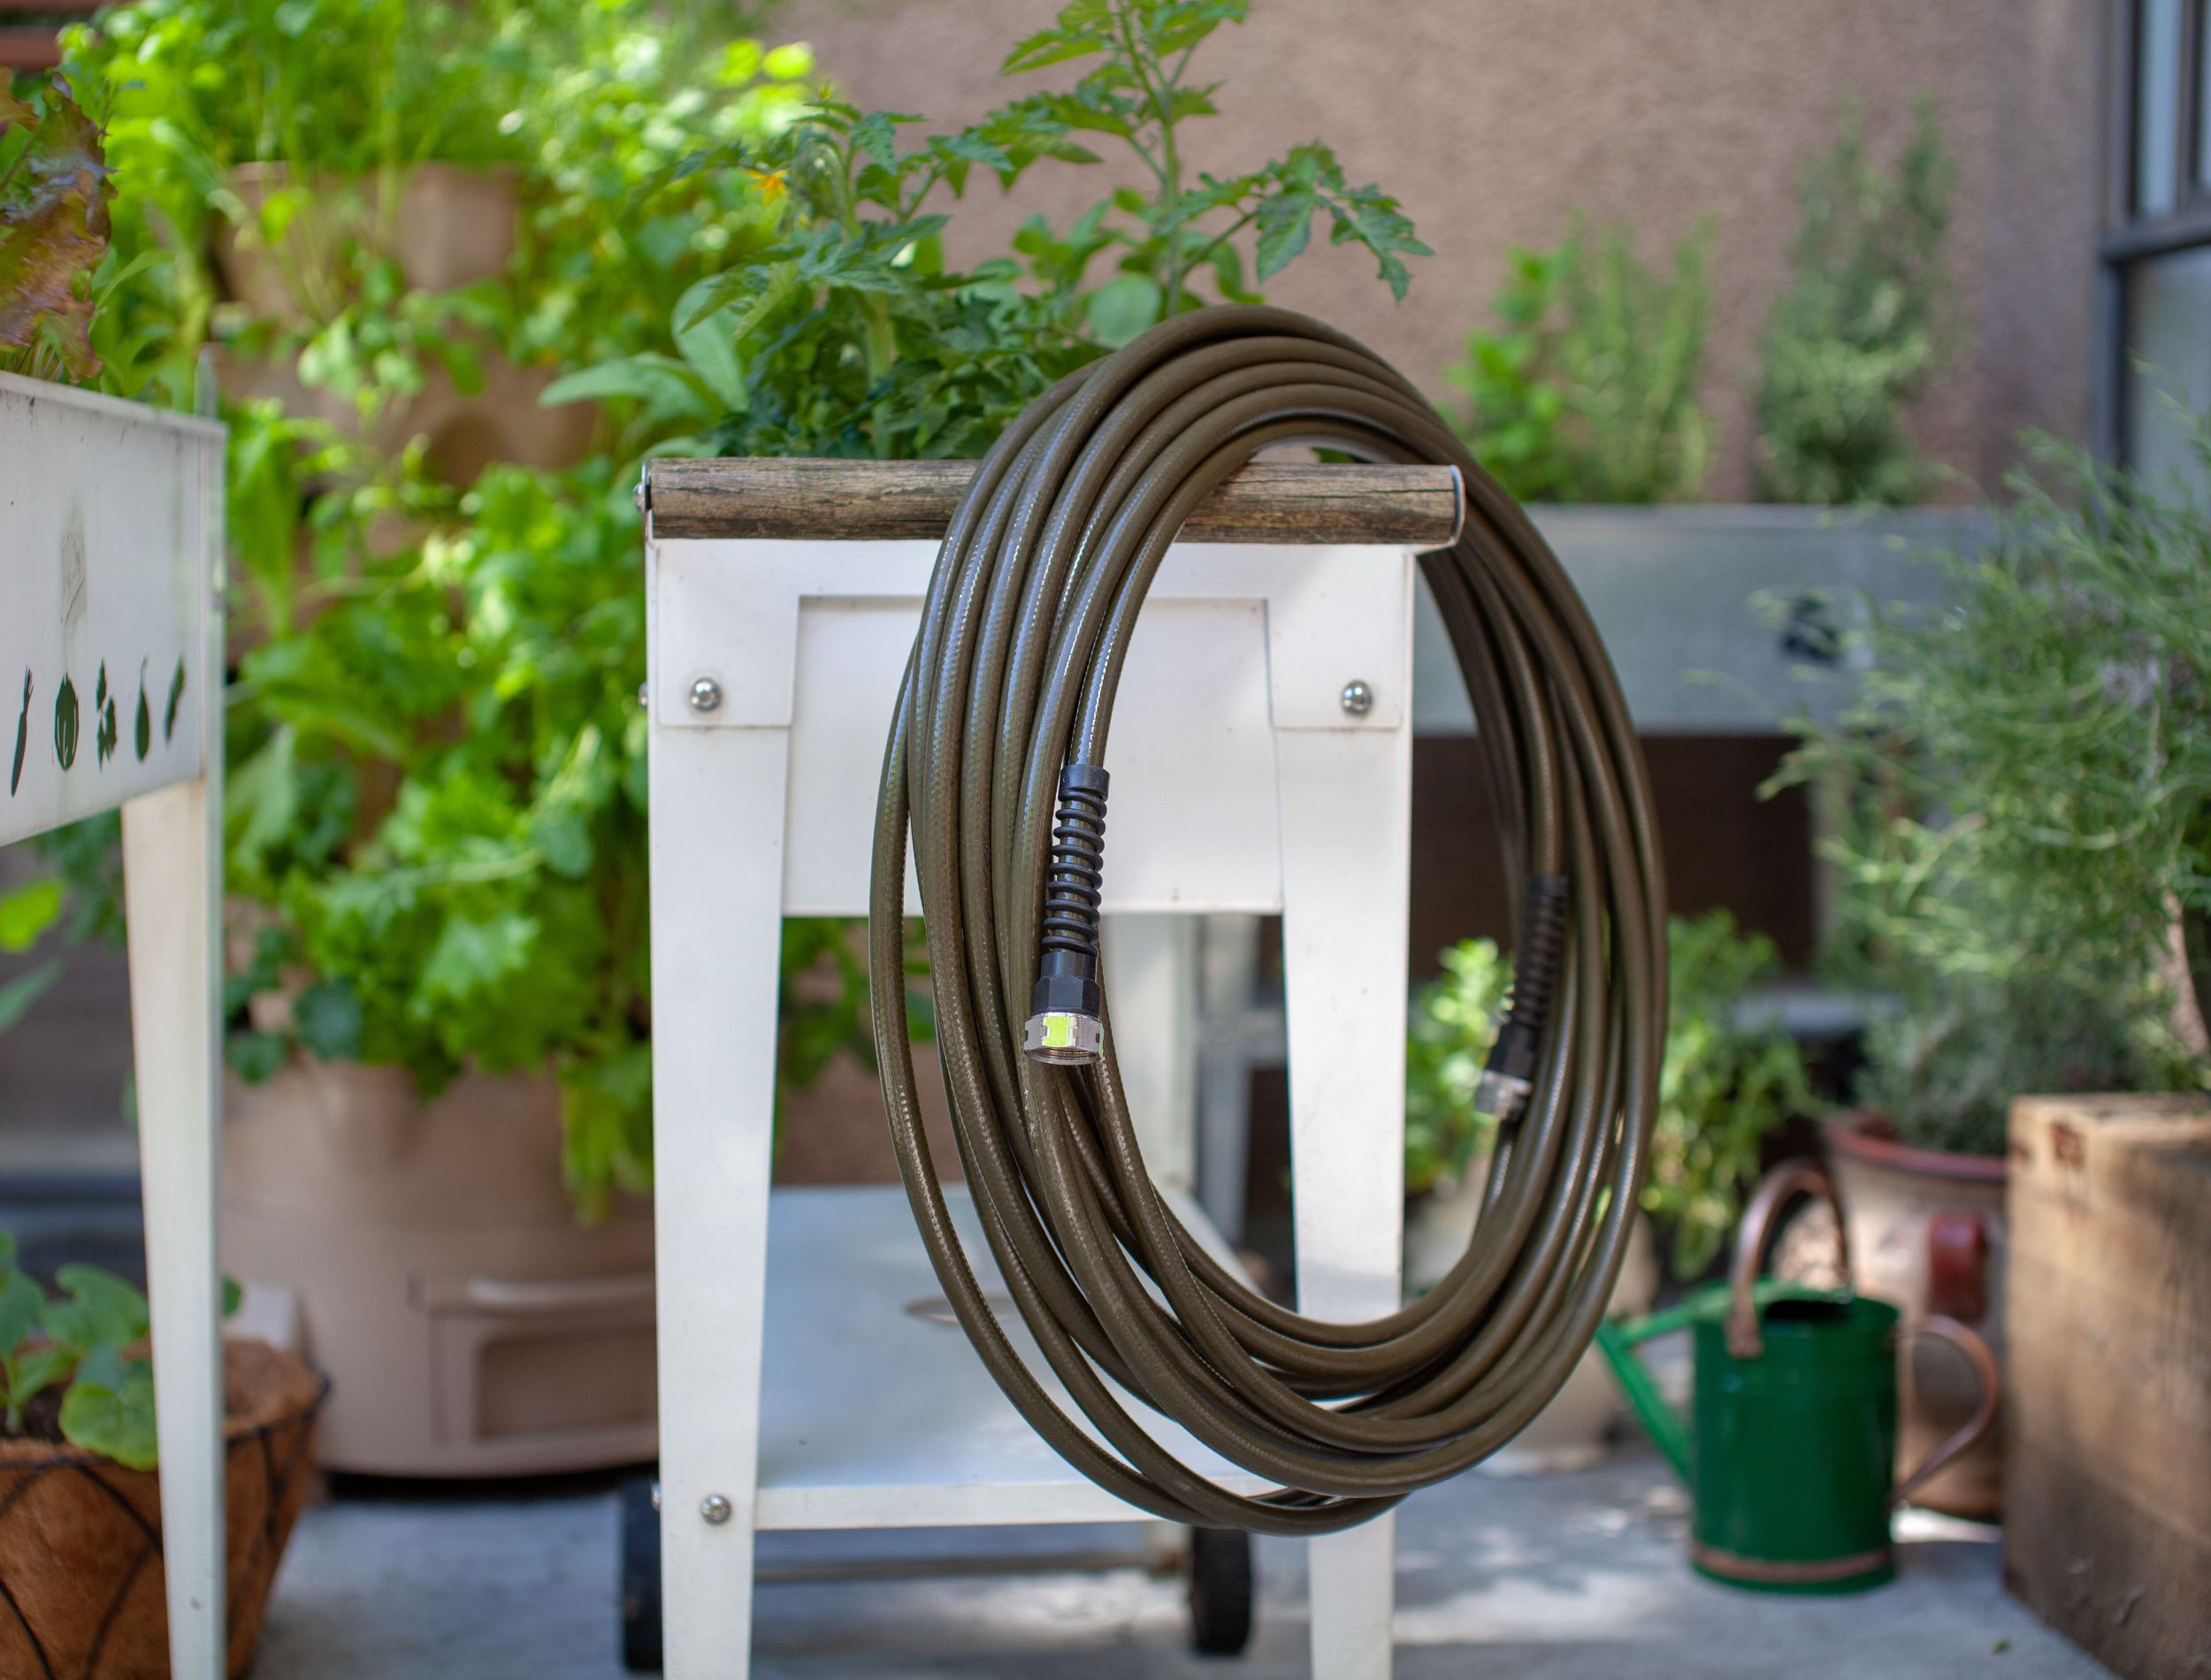 Prime Day Exclusive: Save 60% on the Best-Selling Garden Hose for Your  Garden!